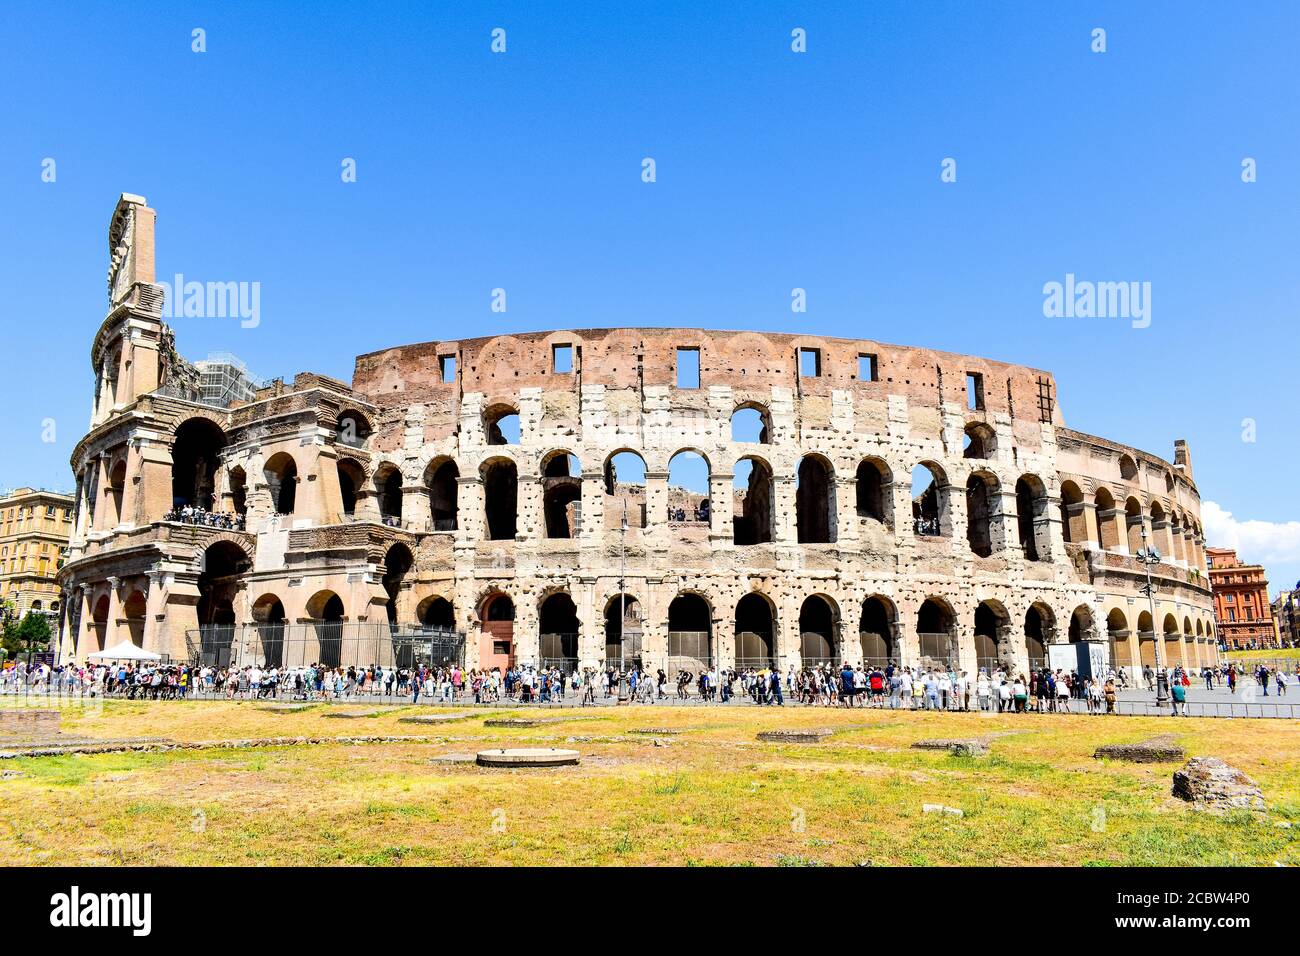 The view outside the Colosseum in Rome Stock Photo